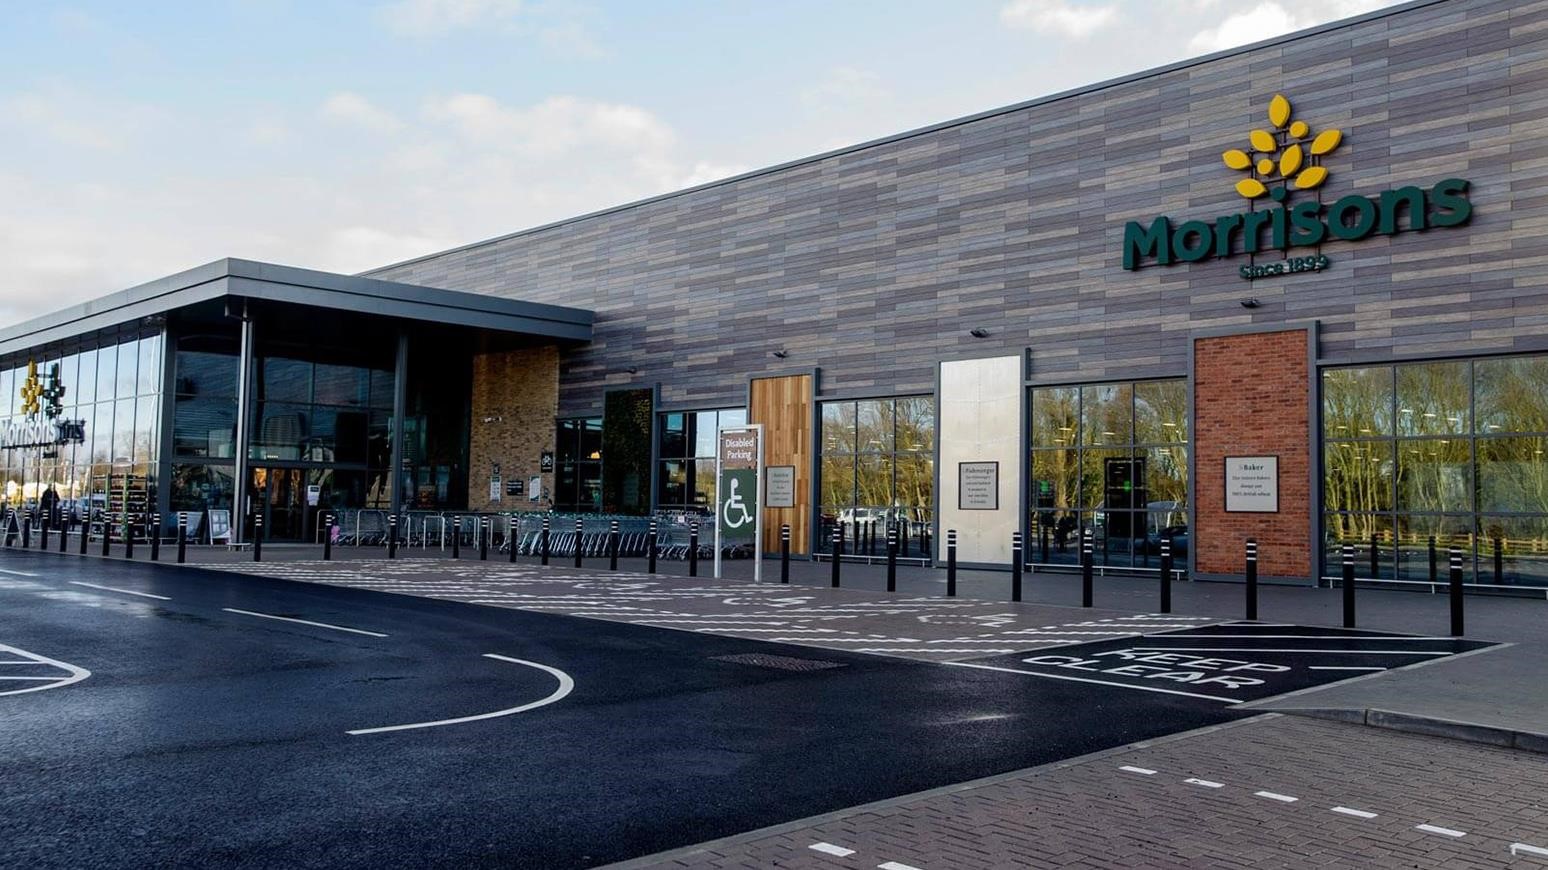 Morrisons To Create 3,500 Extra Jobs To Alleviate Coronavirus-Related Impacts On Colleagues